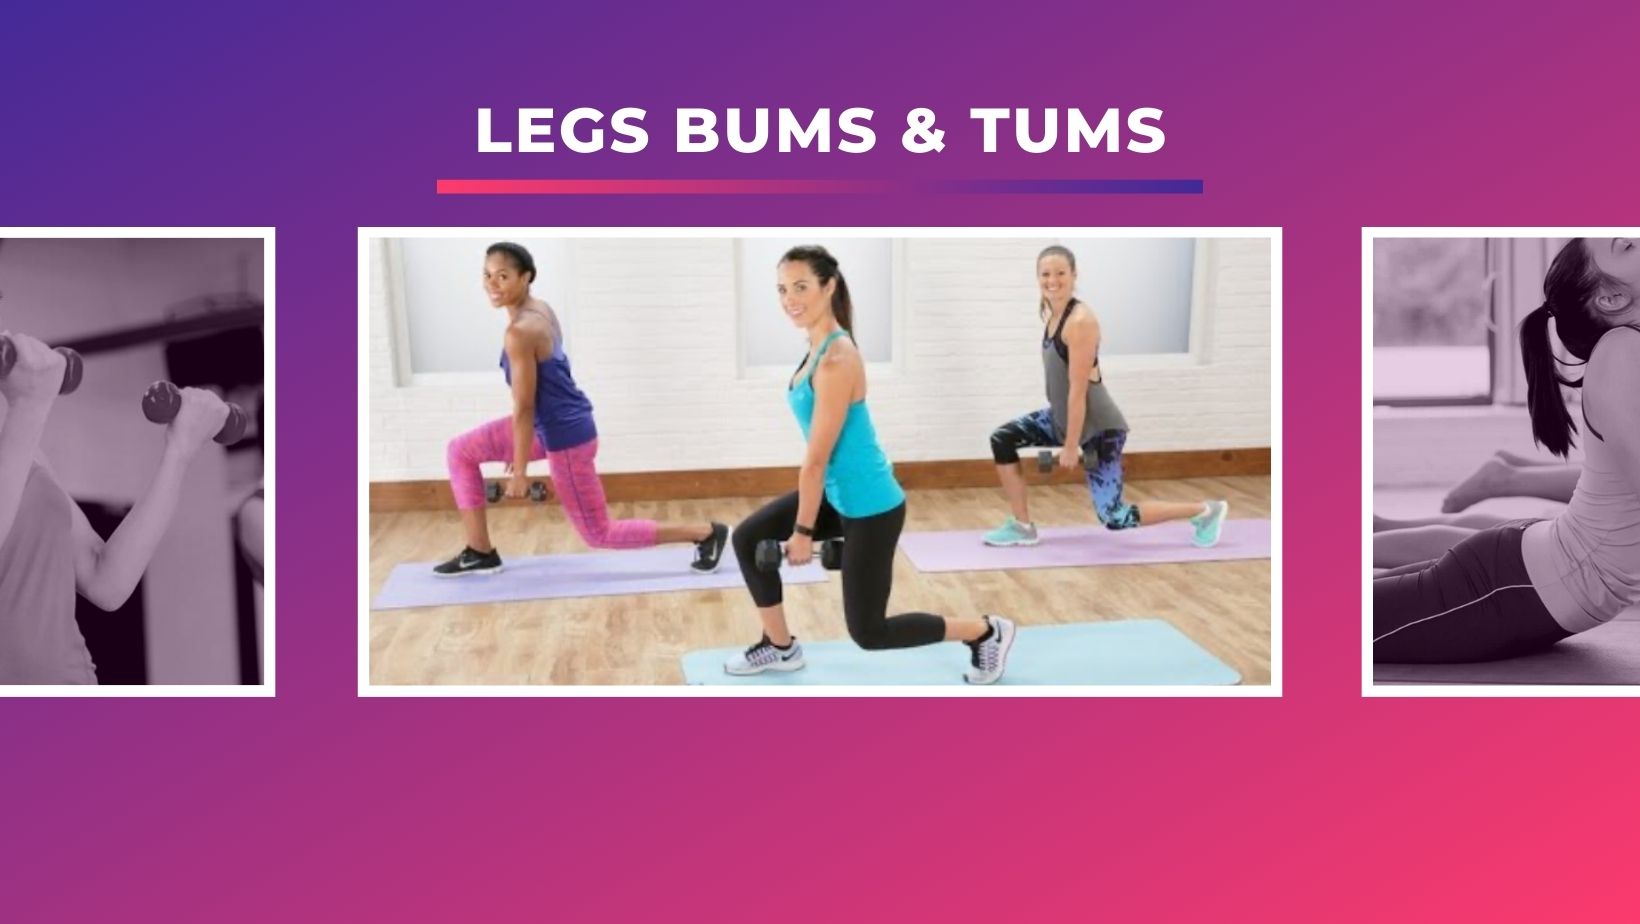 Legs, bums & tums work out